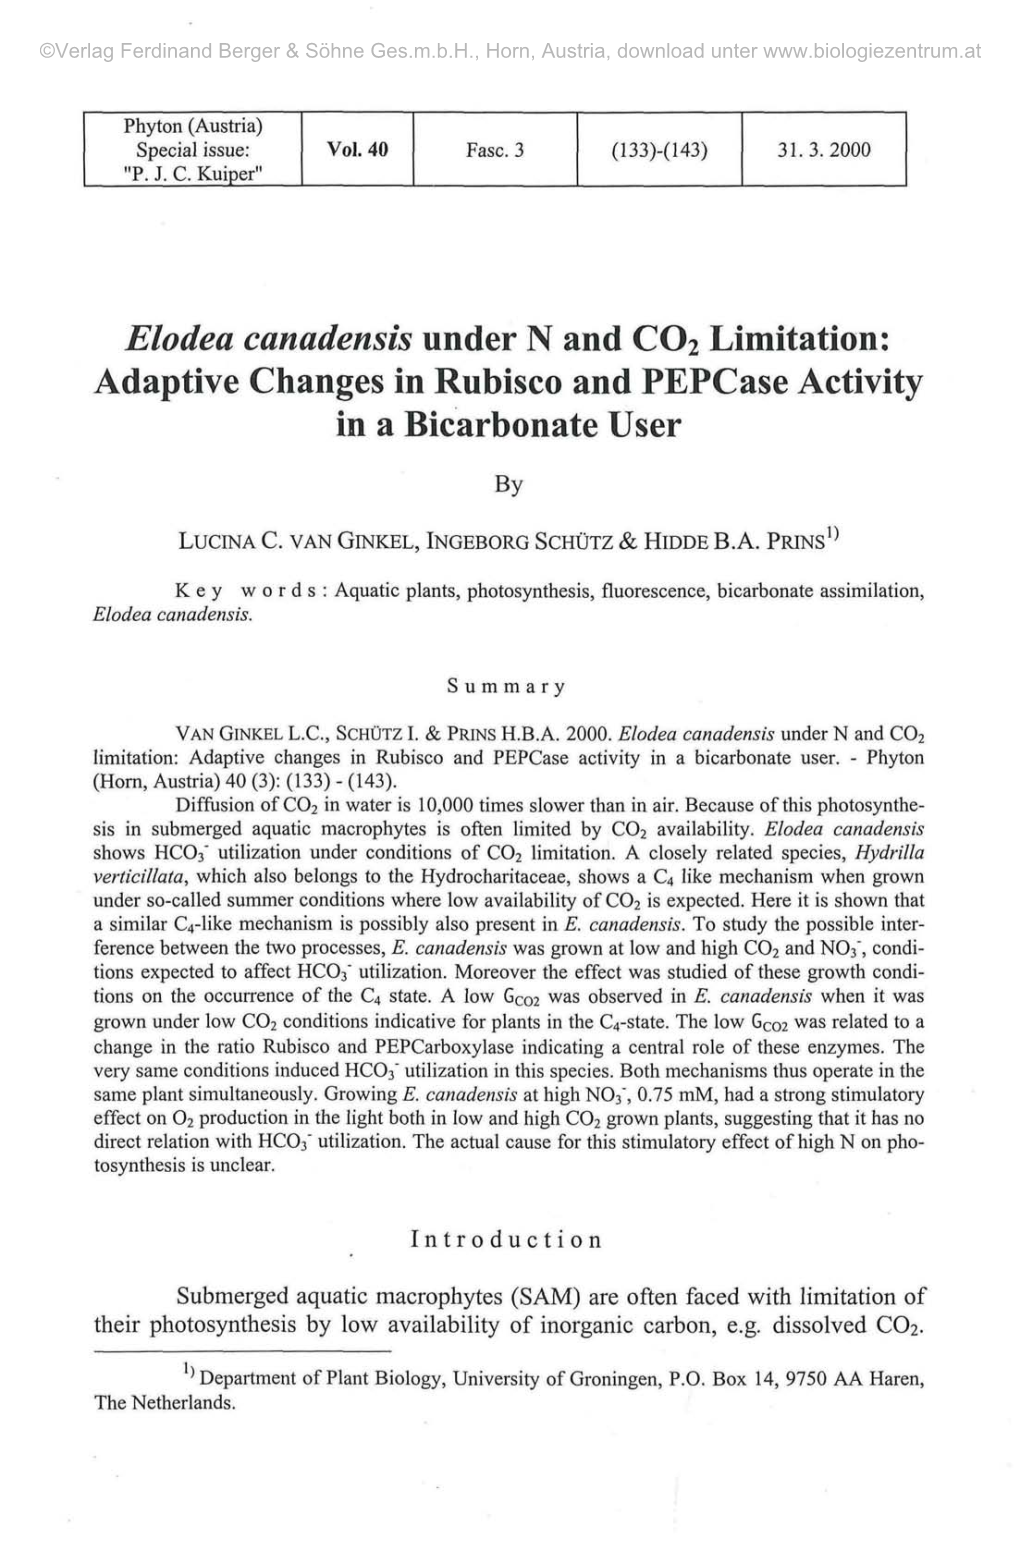 Elodea Canadensis Under N and CO2 Limitation: Adaptive Changes in Rubisco and Pepcase Activity in a Bicarbonate User